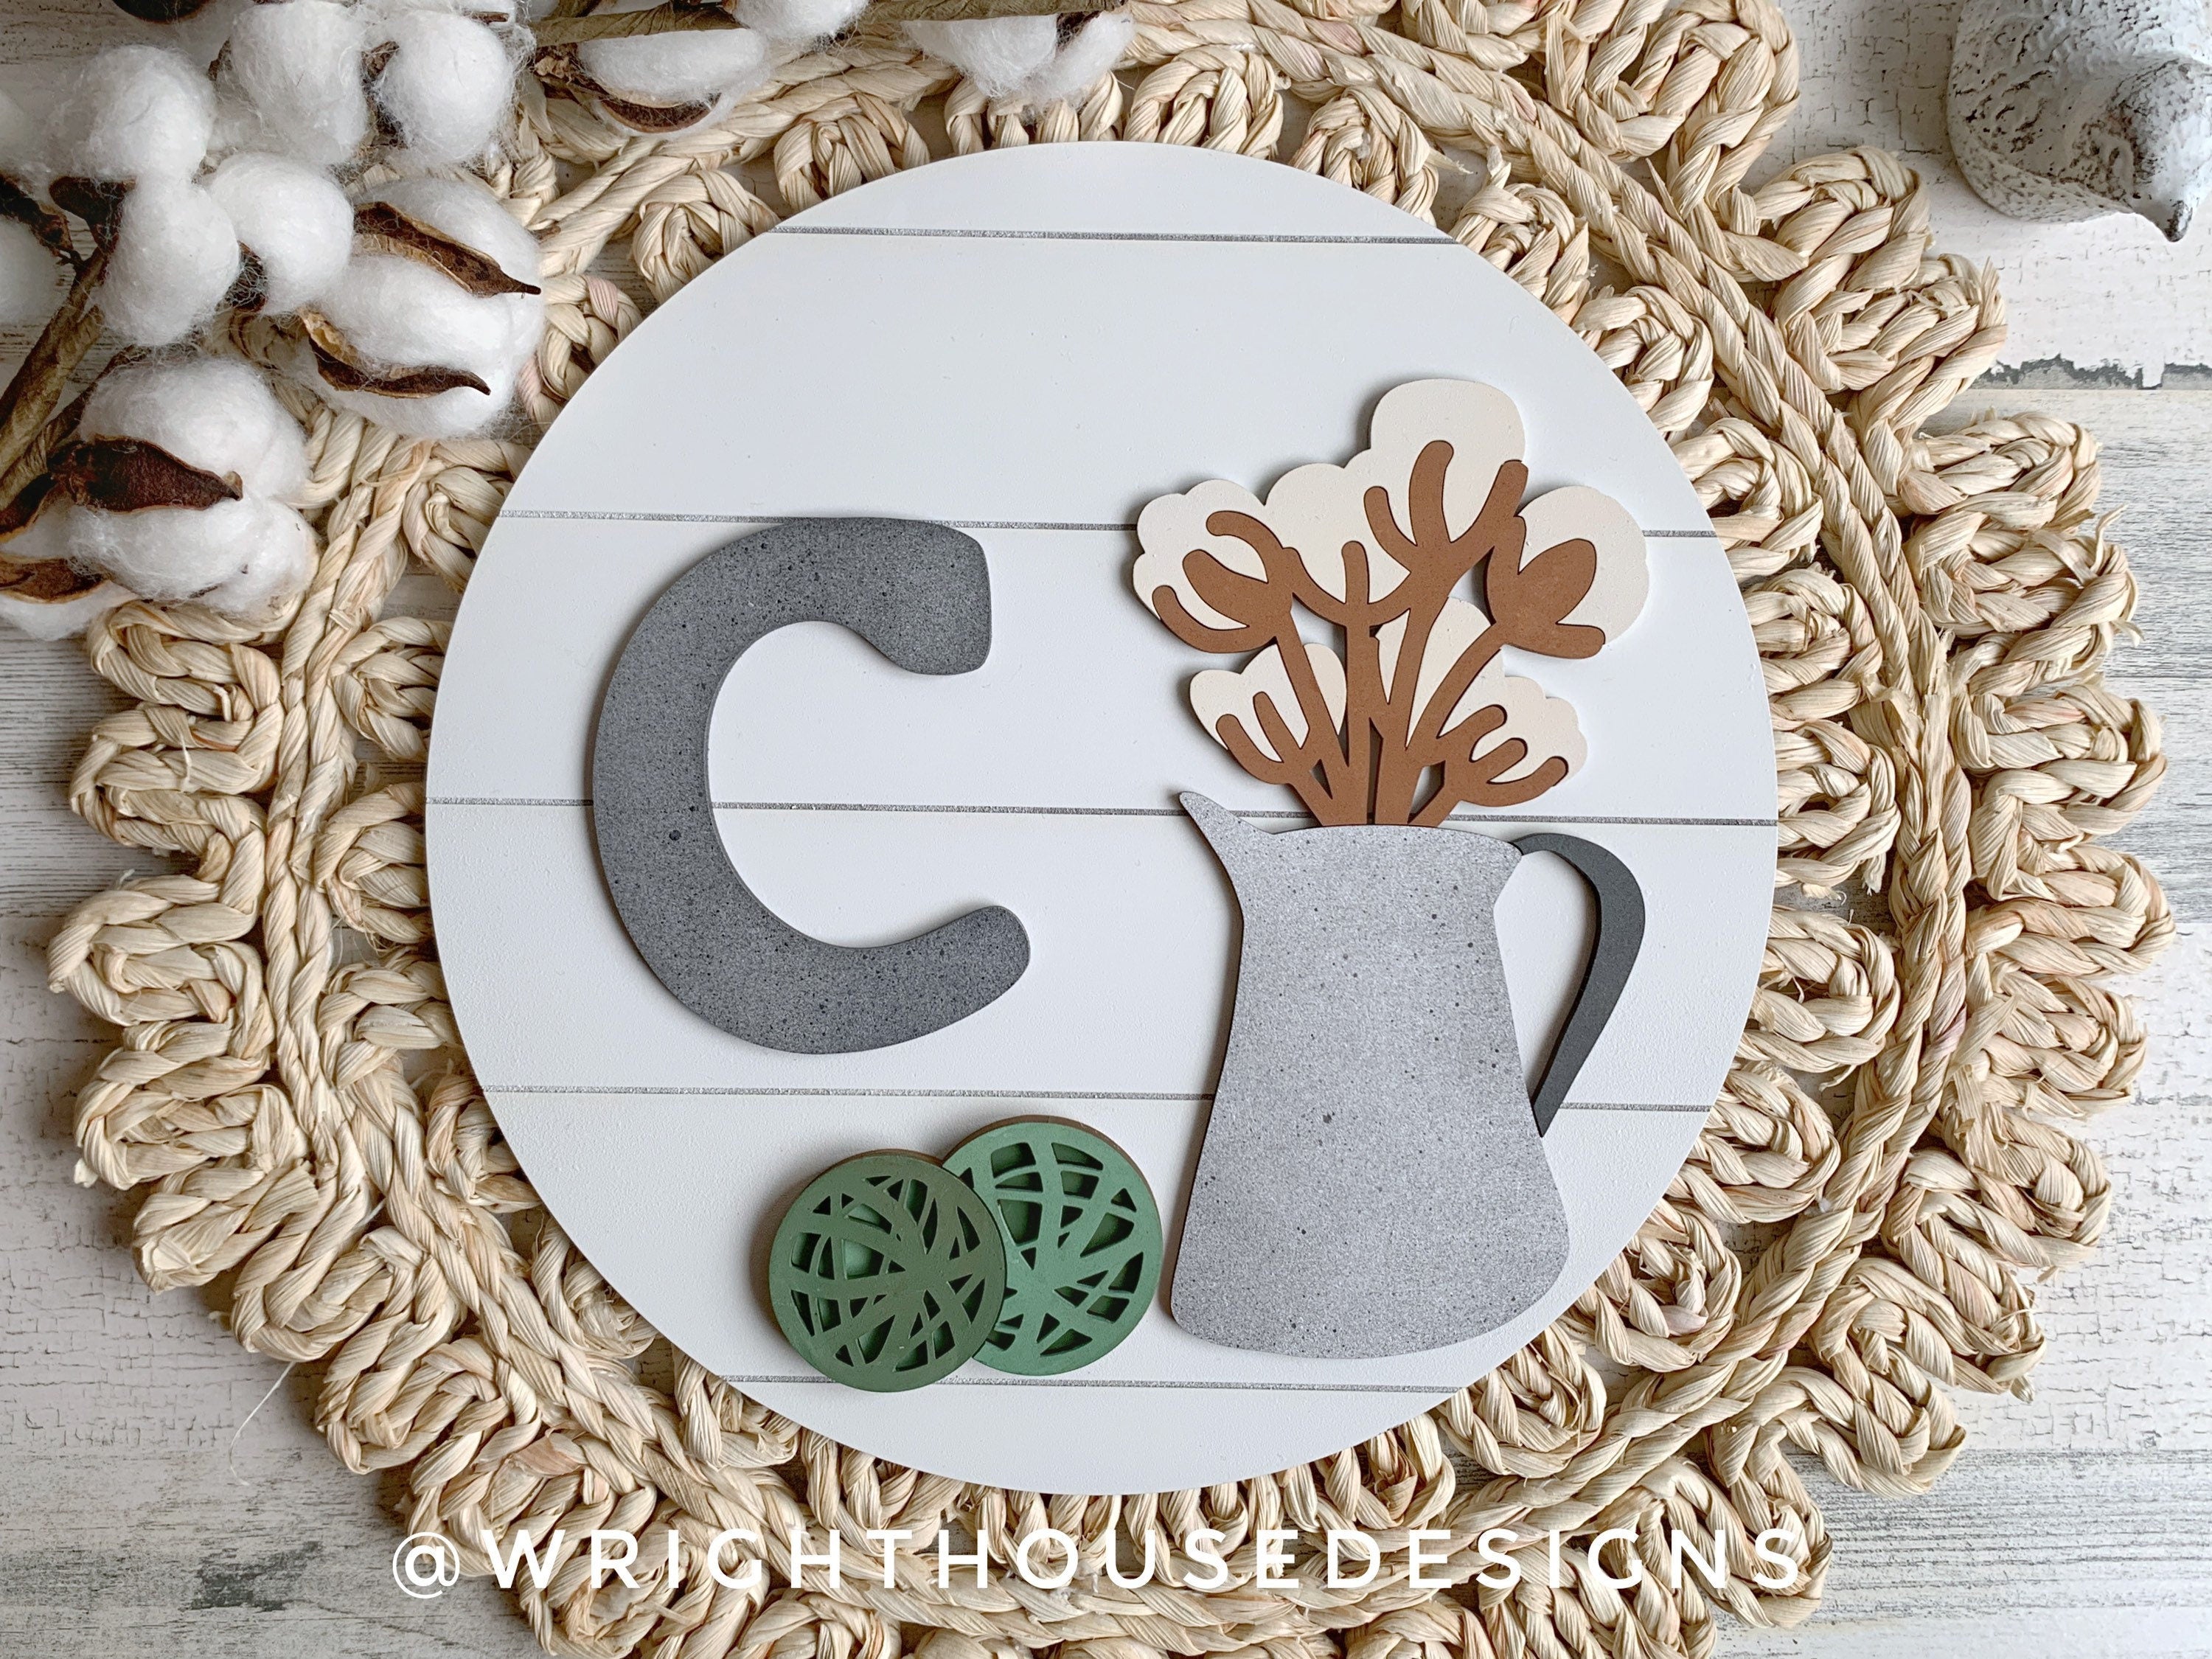 Southern Farmhouse Cotton - Galvanized Watering Can - Botanical Spheres - Personalized Monogram - Shiplap Style - Round Shelf Sitter Sign